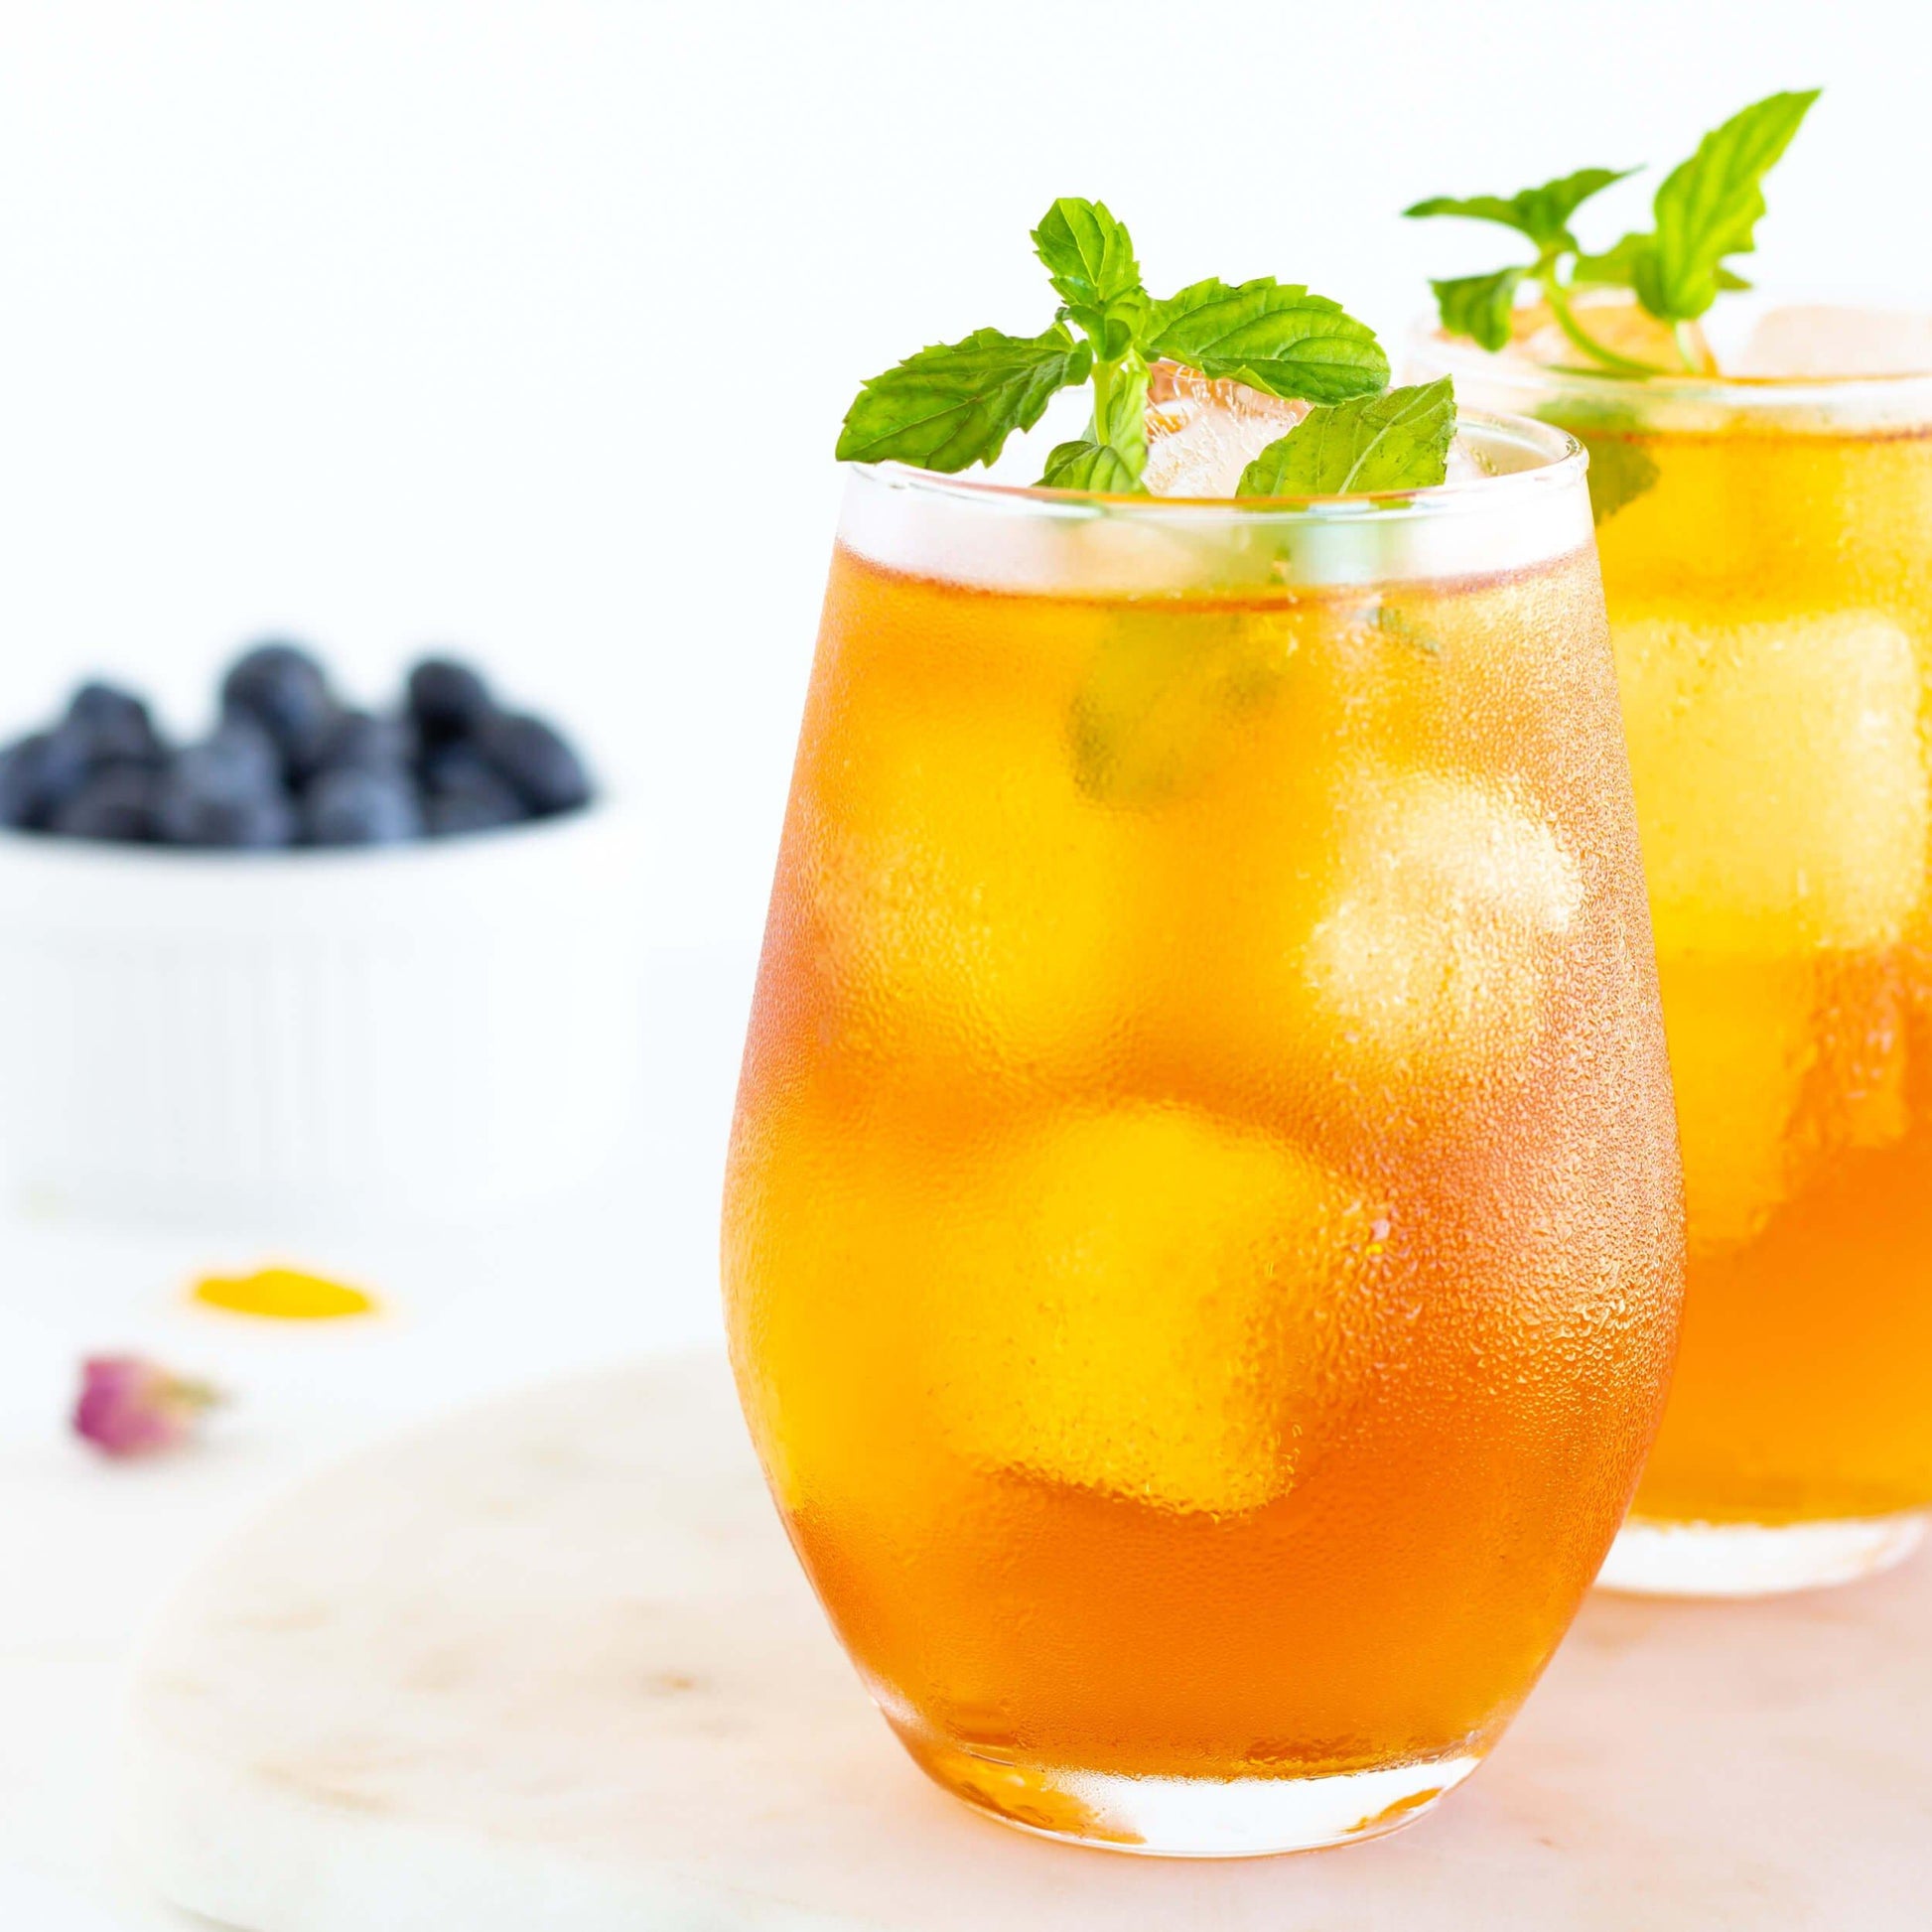 Iced Green Rooibos with Blossoms Herbal Tea with blueberries and mint